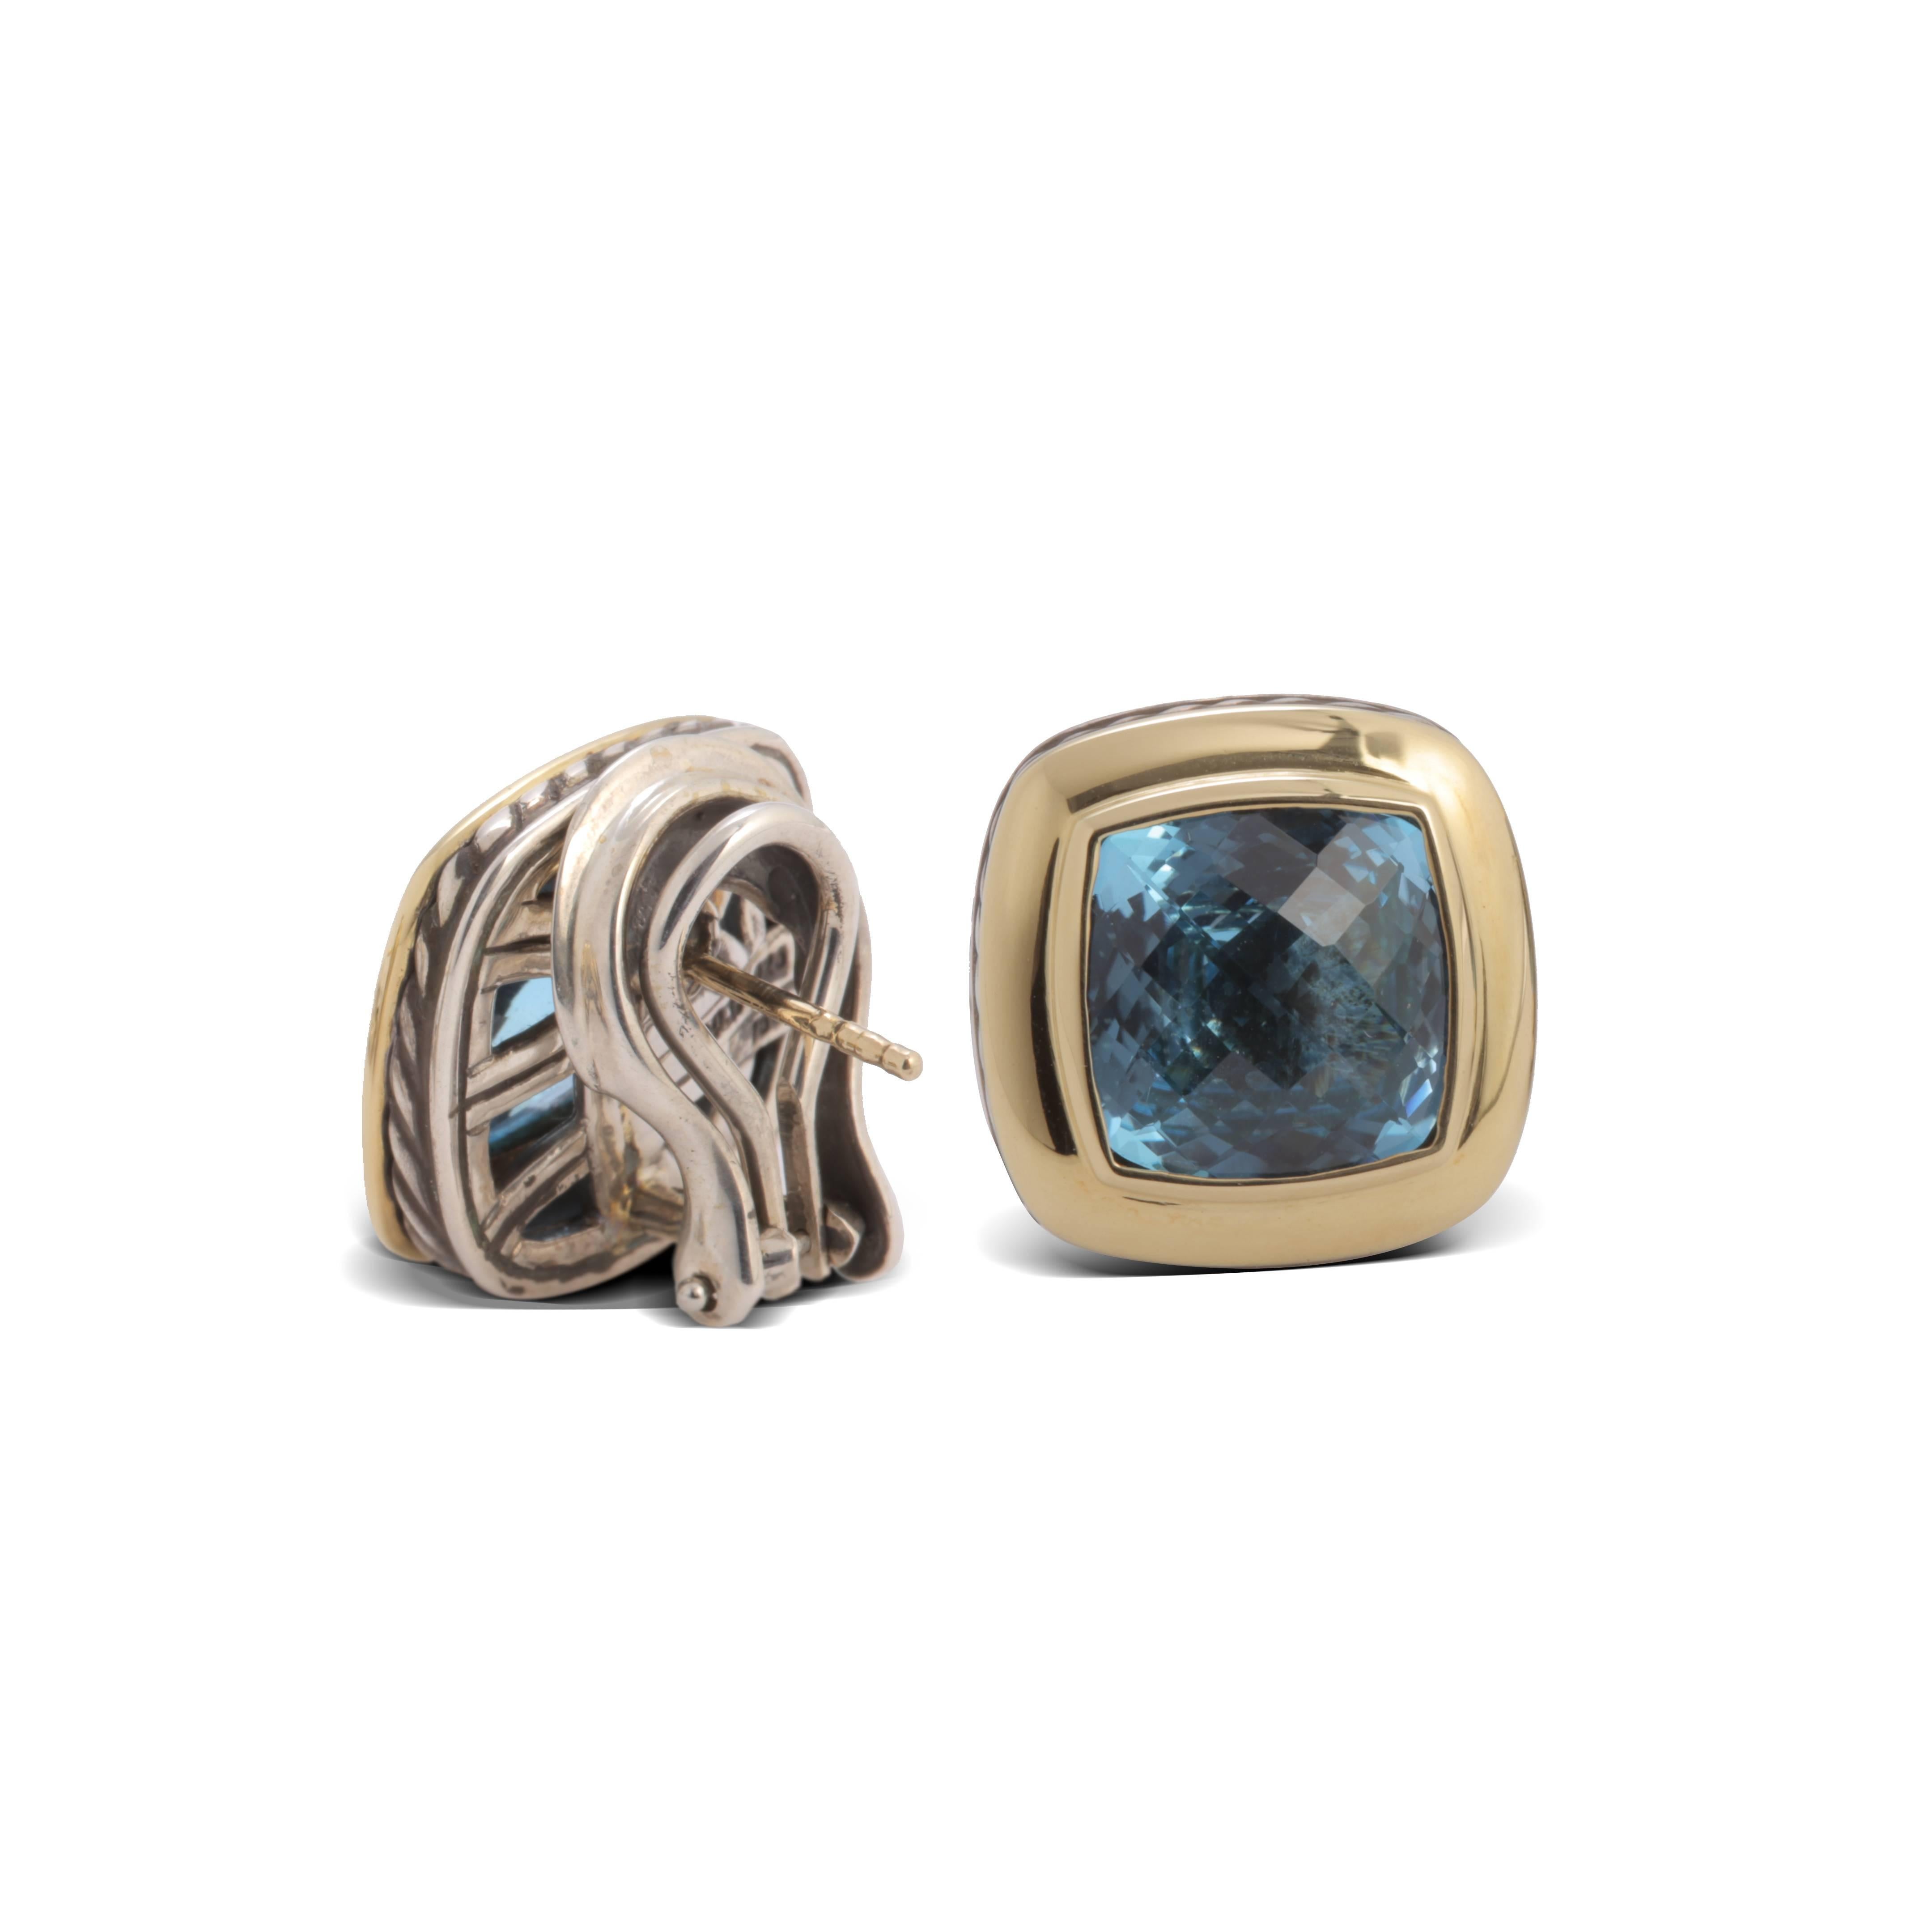 Previously loved sterling silver and 18 karat yellow gold David Yurman Albion earrings featuring blue faceted topaz accents at center and clutch back closures.